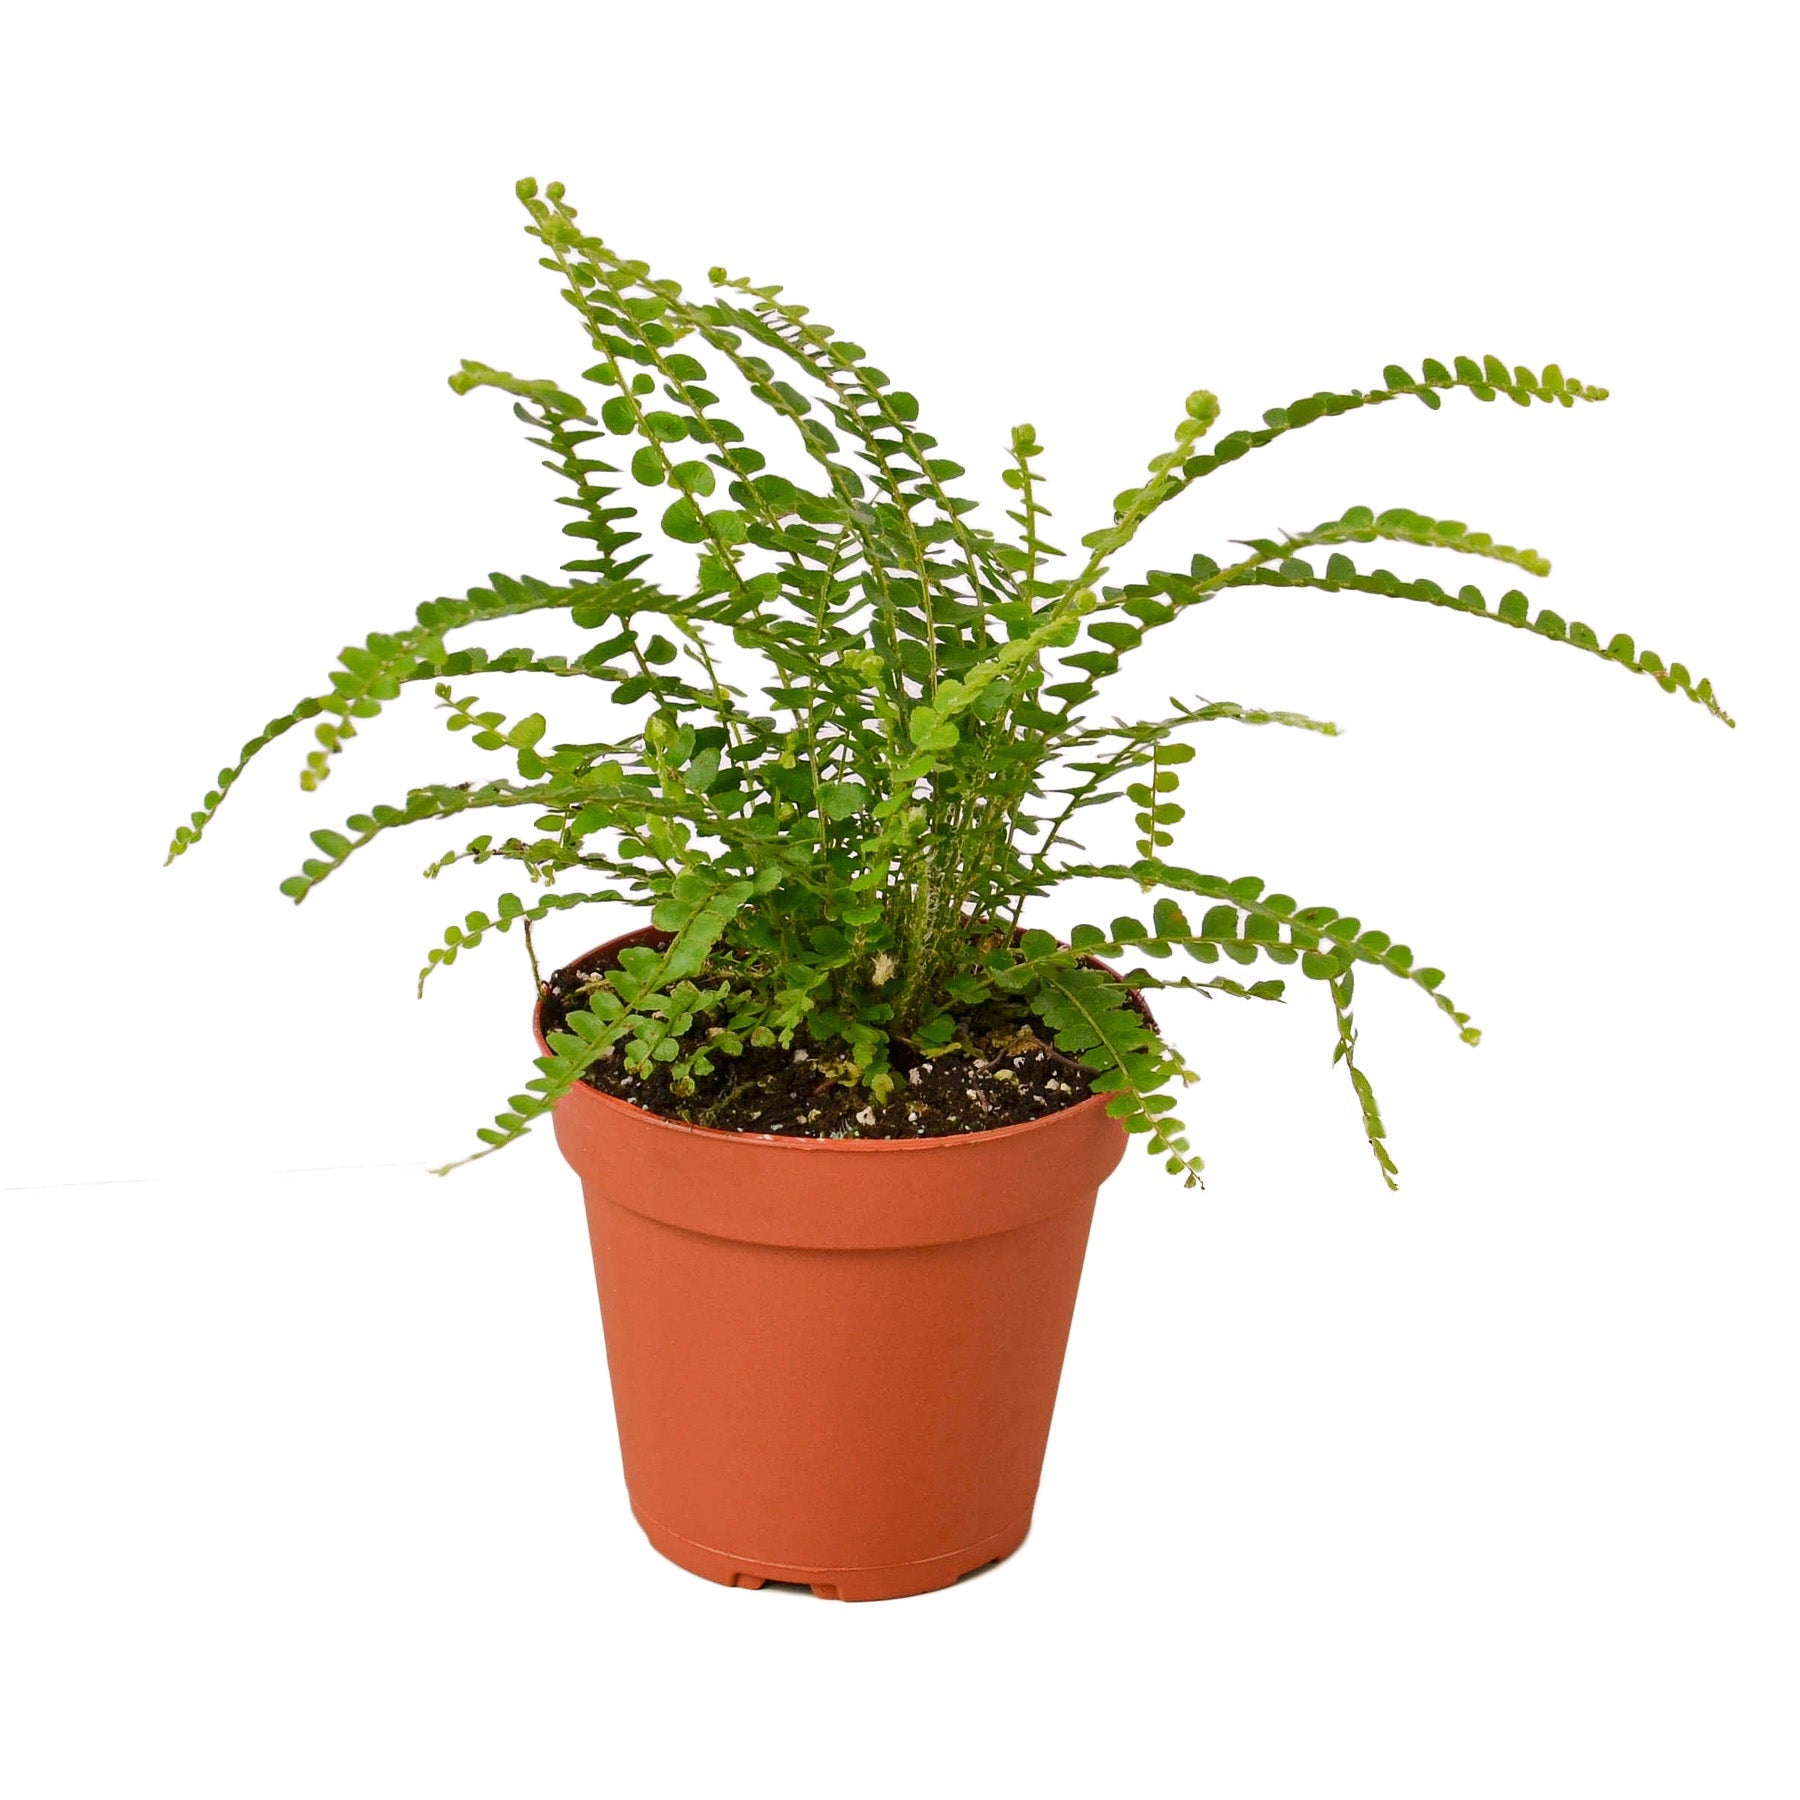 A small plant in a pot.